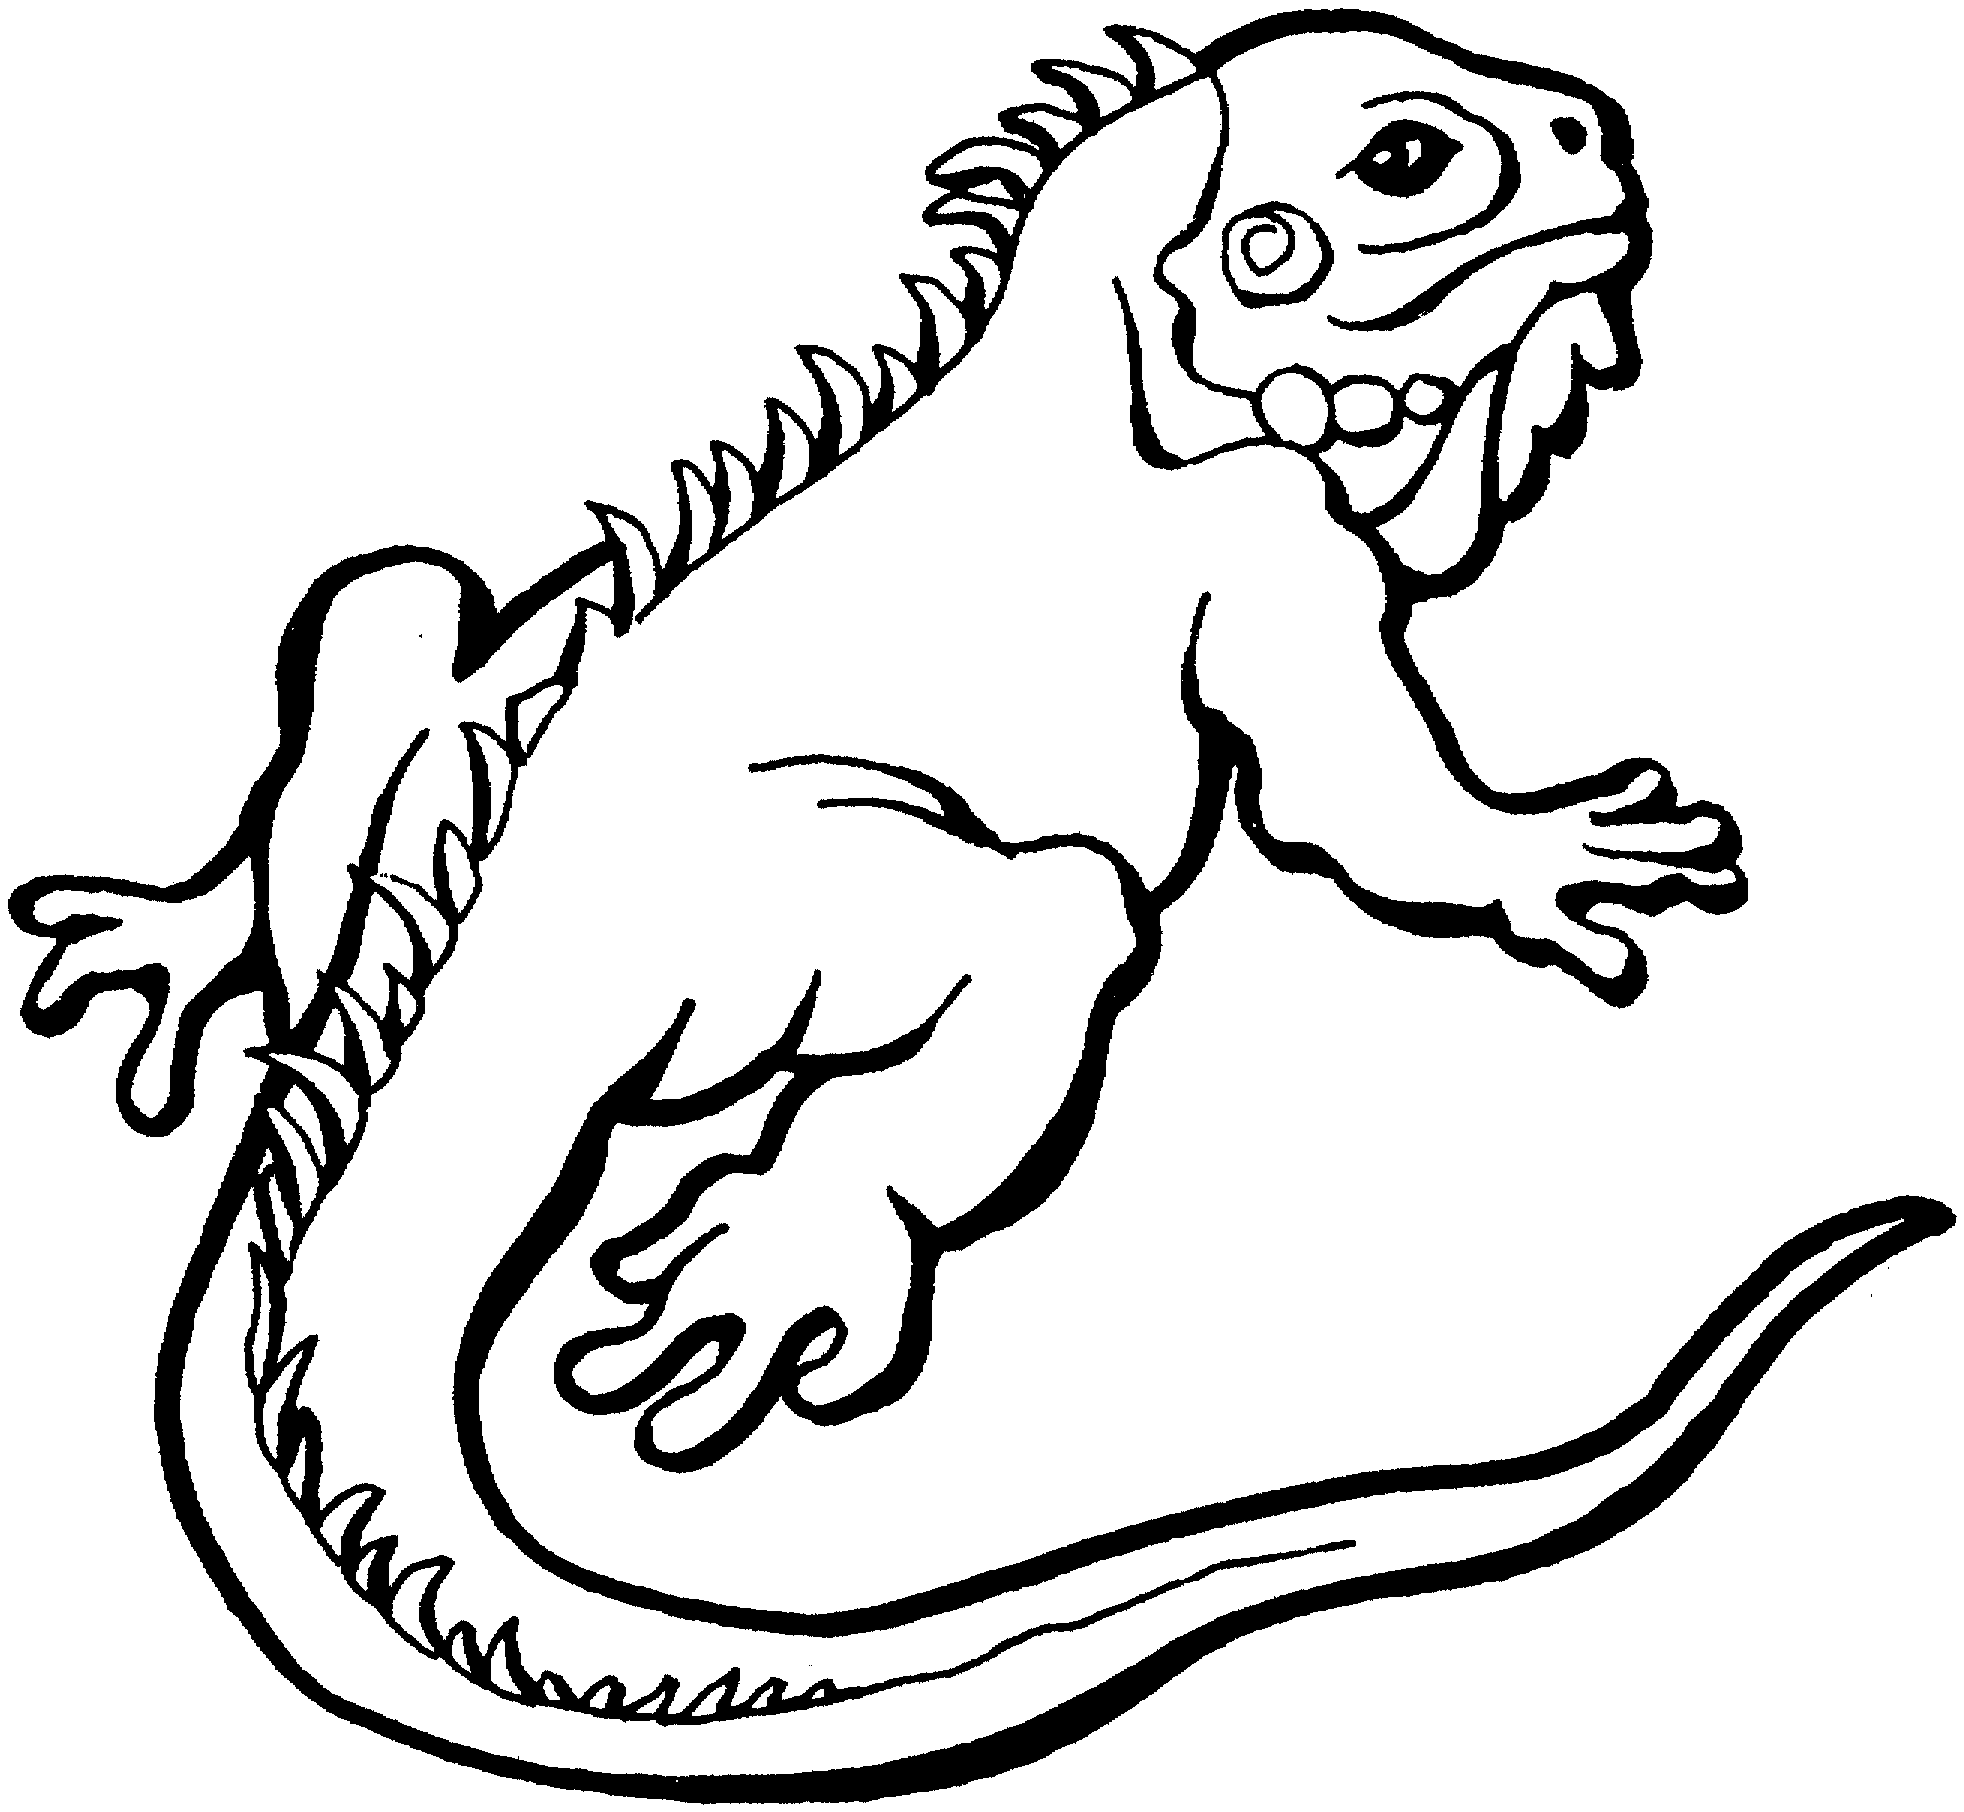 lizard pictures to color free printable lizard coloring pages for kids pictures to color lizard 